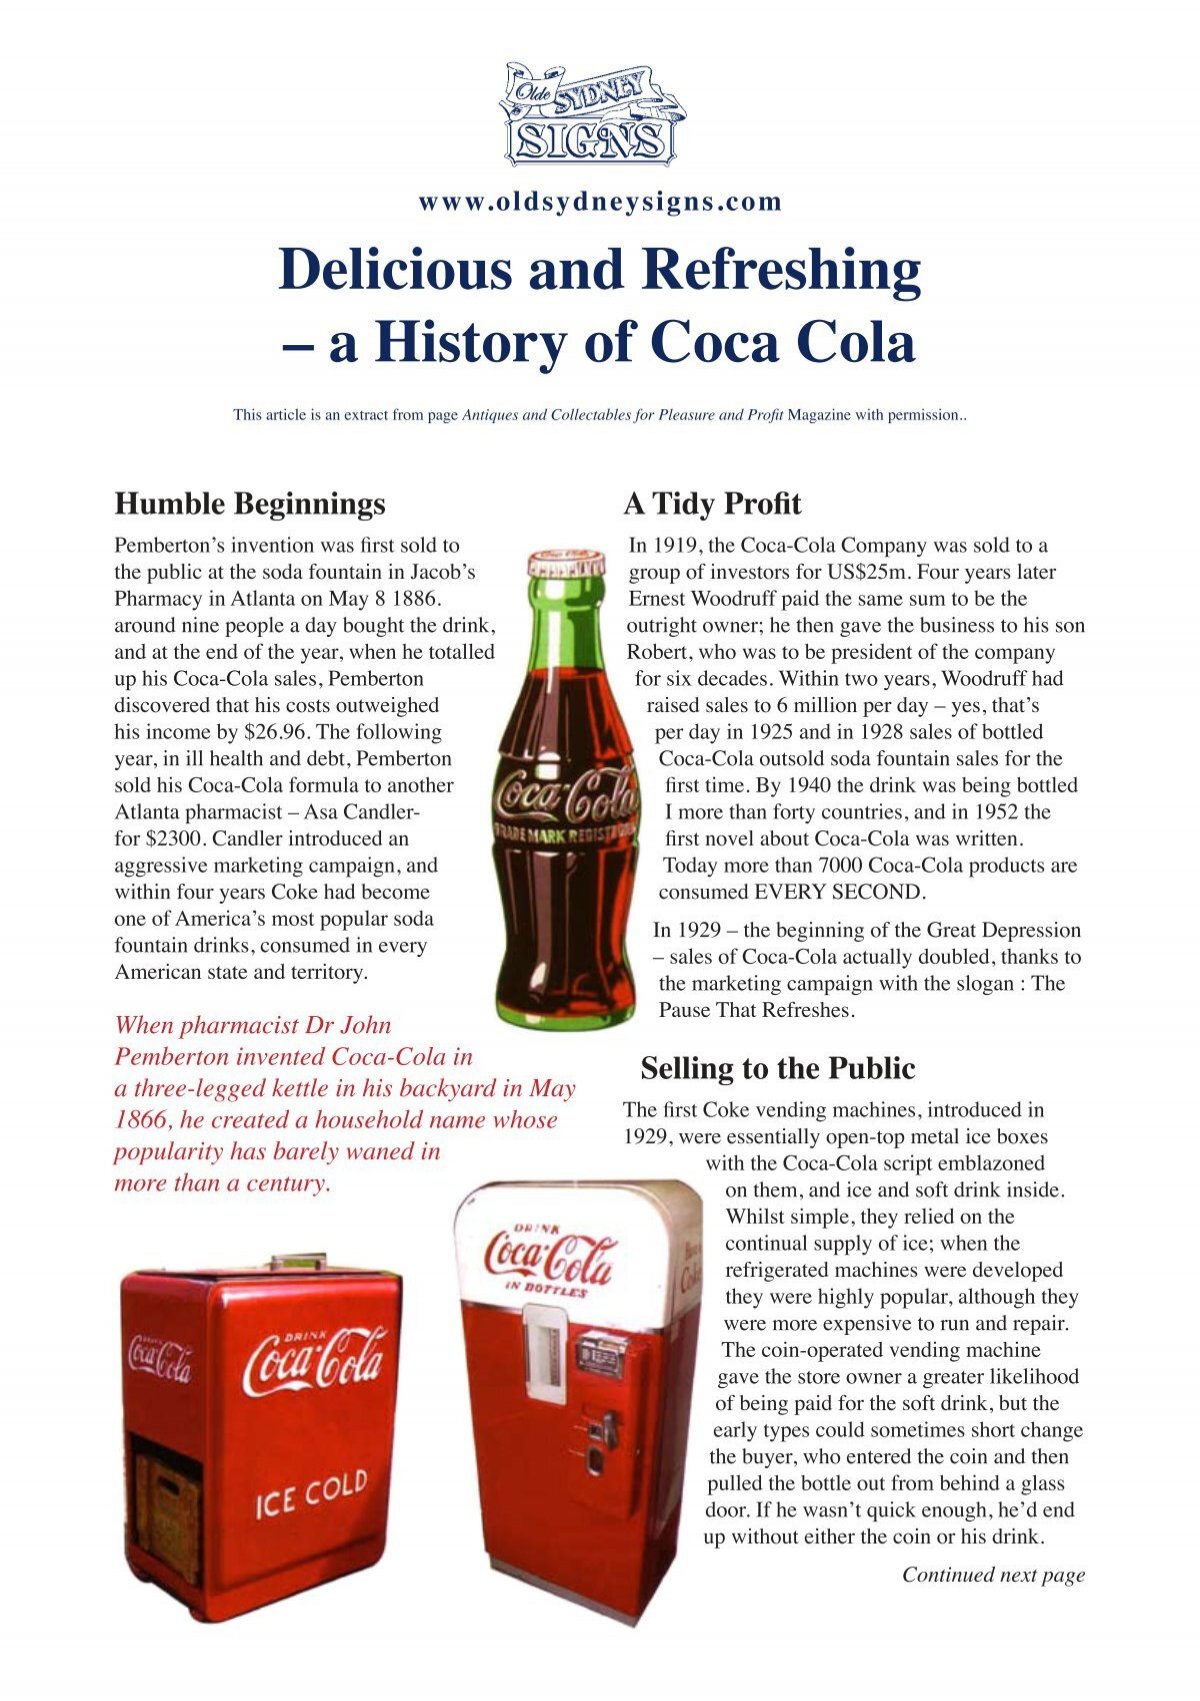 The Coca-Cola Company, History, Products, & Facts